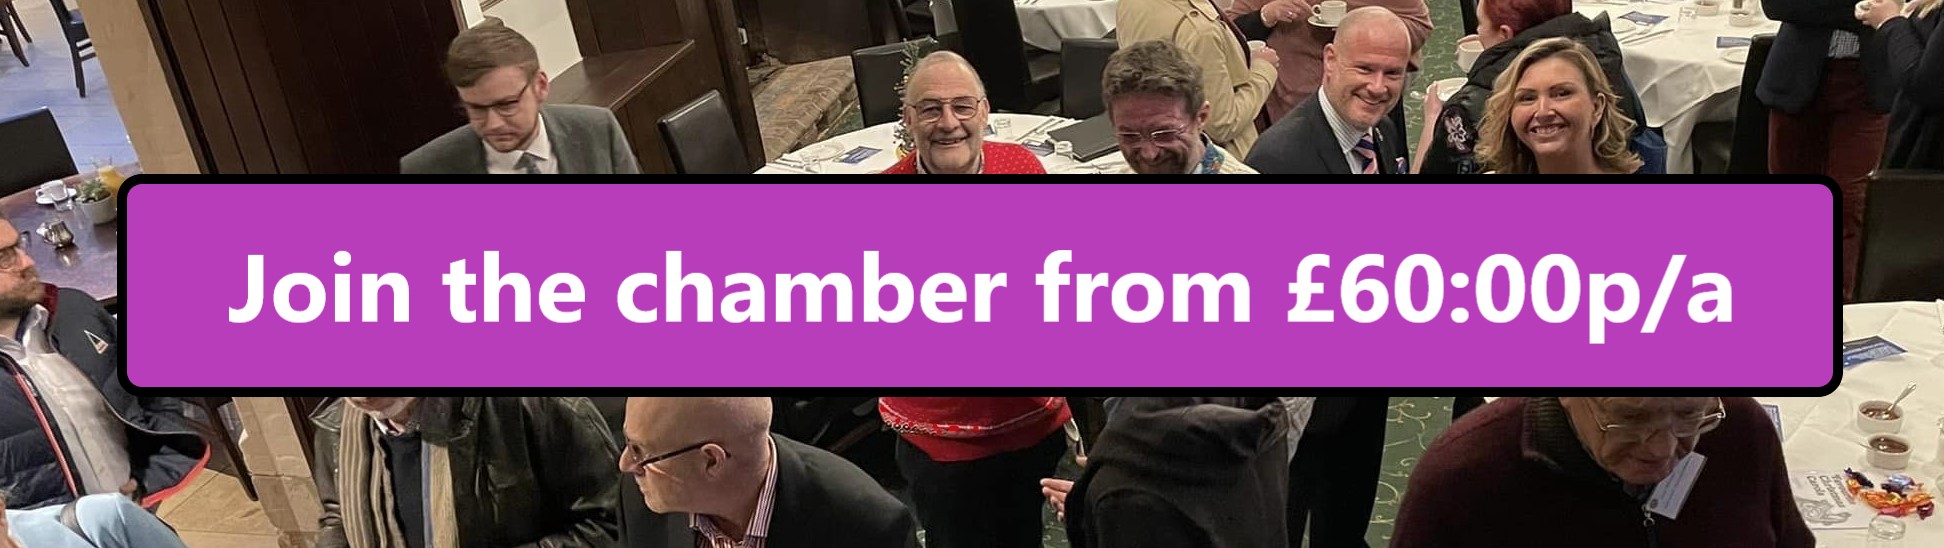 Join Dorchester Chamber Dorset from £60p/a